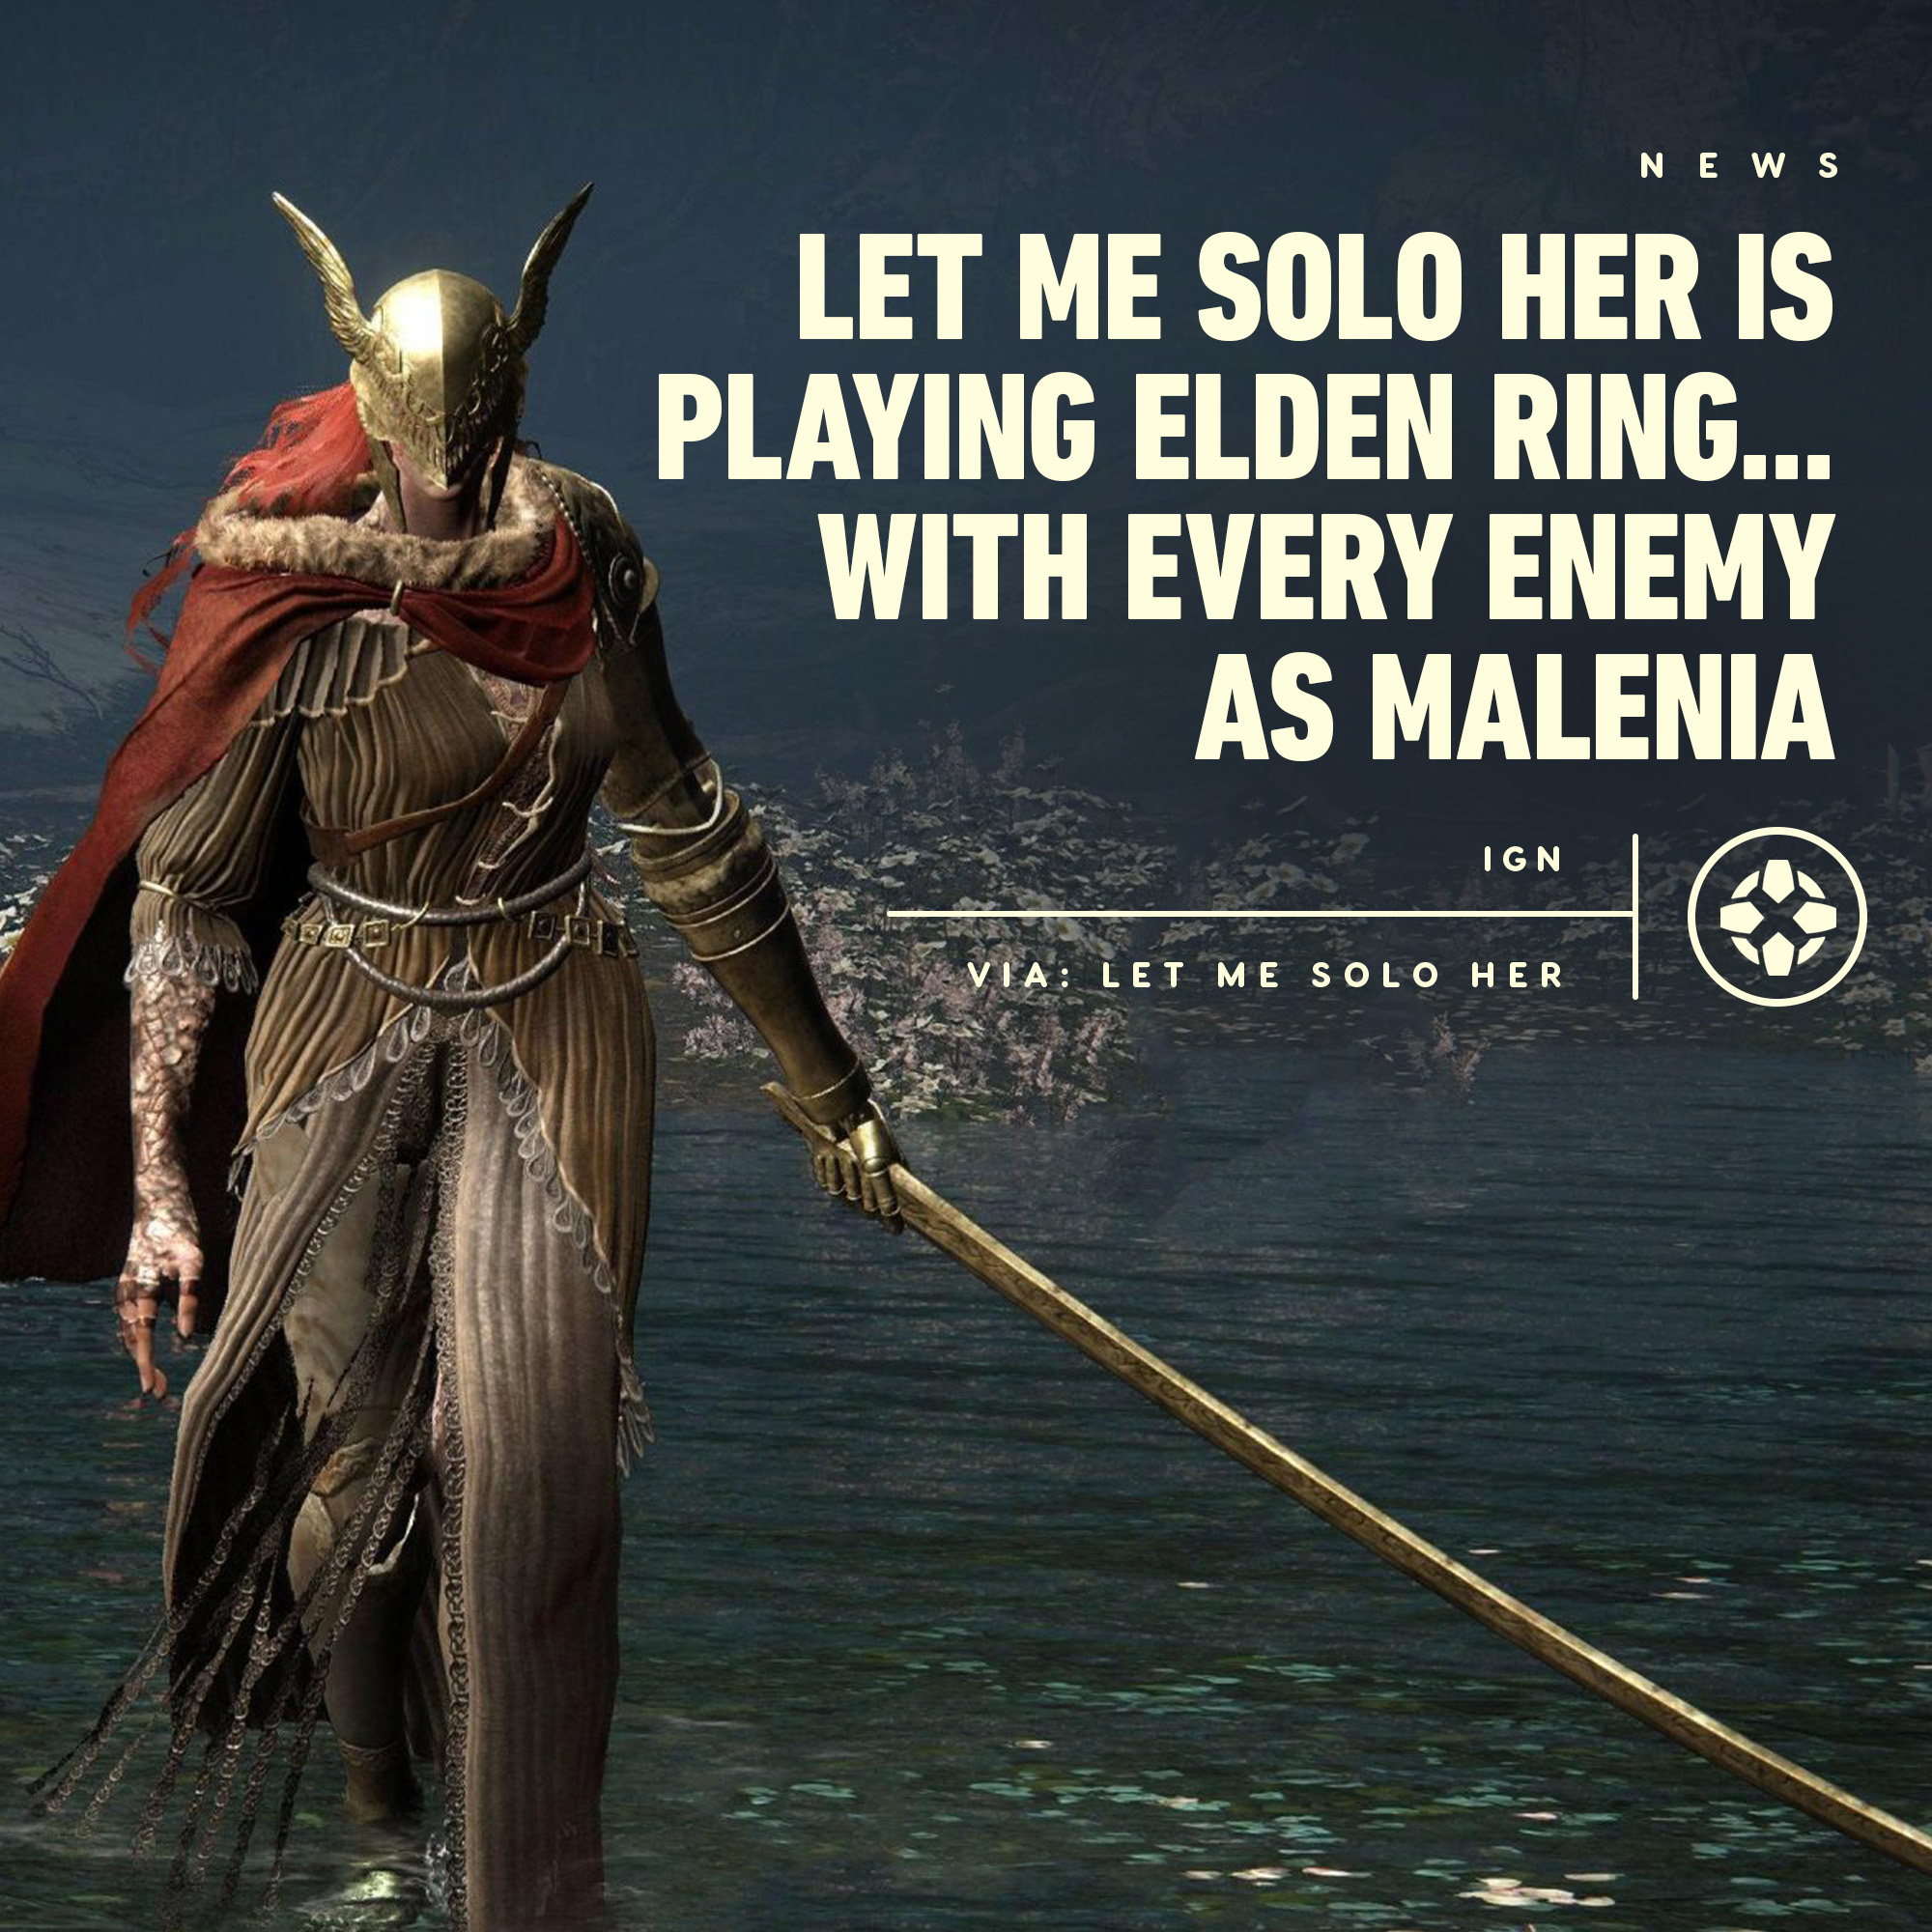 How to beat the hardest boss in Elden Ring – Malenia